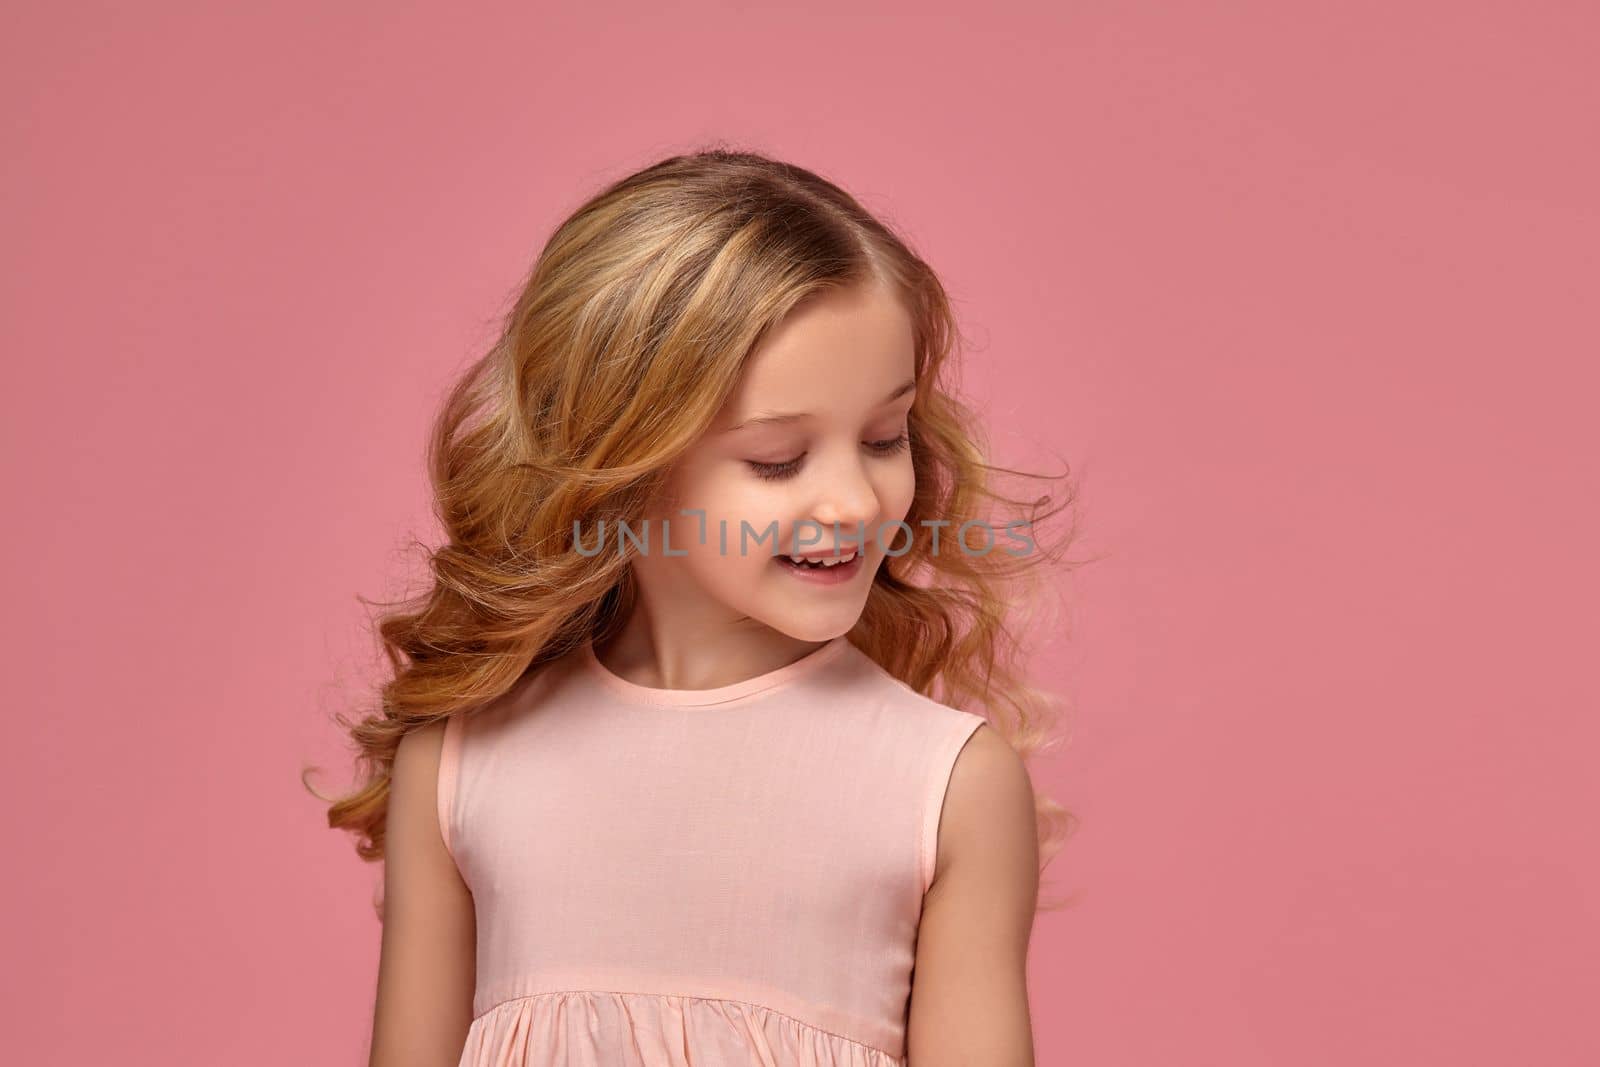 Beautiful little girl with a blond curly hair, in a pink dress is posing for the camera and looking down, on a pink background